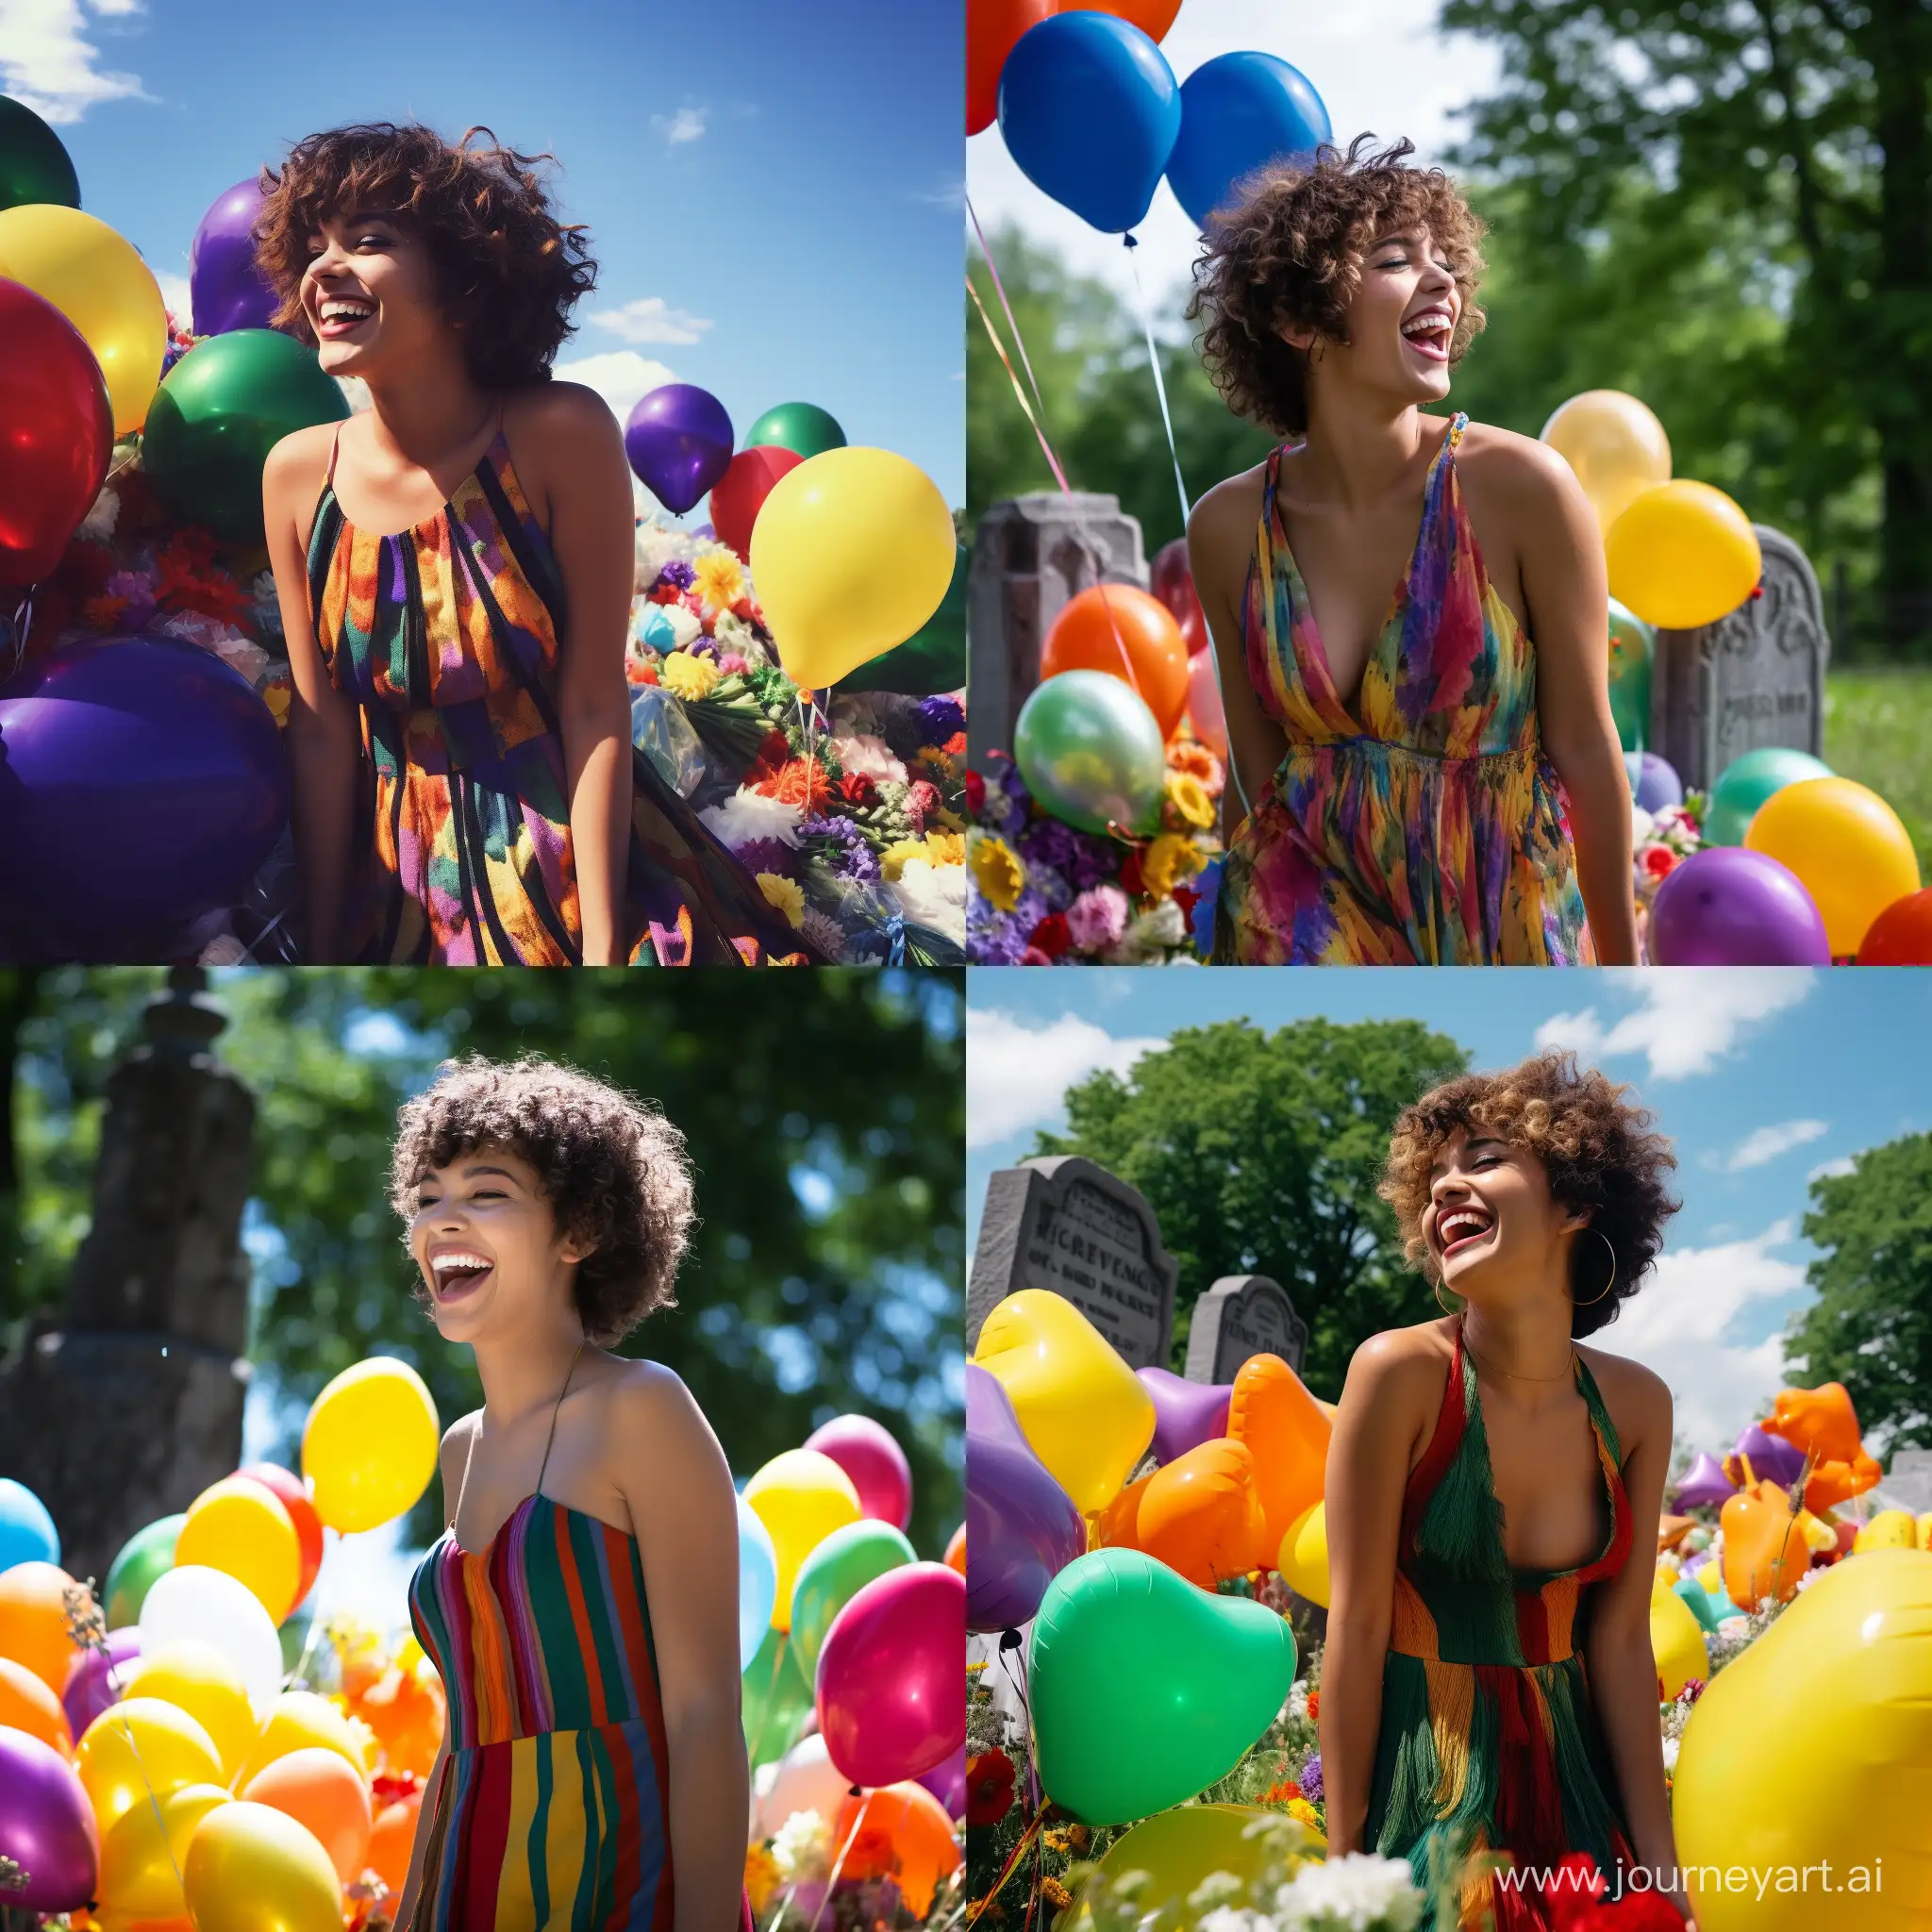 A joyful, laughing person with colorful balloons standing in a stark, lifeless graveyard. The person is of Hispanic descent, mid-20s, with short curly hair, wearing a bright yellow summer dress. The balloons are in a mix of vibrant colors: red, blue, green, and purple. The graveyard is gray and gloomy, with old tombstones and bare trees, creating a contrast between the liveliness of the balloons and the somberness of the surroundings. The light is soft, suggesting early morning. The scene captures a poignant juxtaposition of life and death, happiness amidst solemnity.